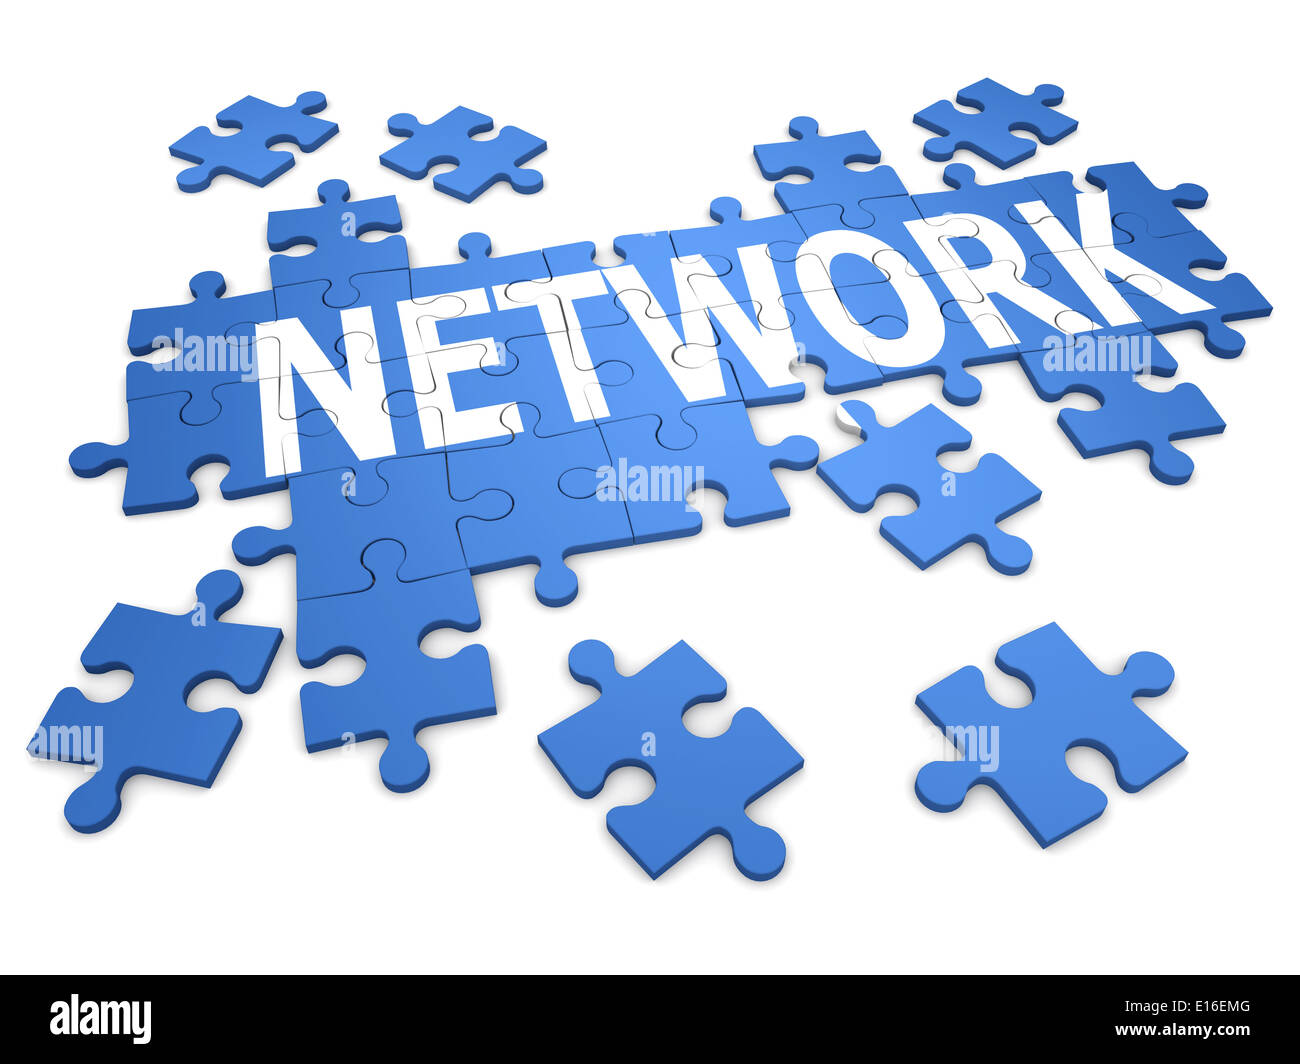 3d Jigsaw puzzle marked with the word "Network Stock Photo - Alamy